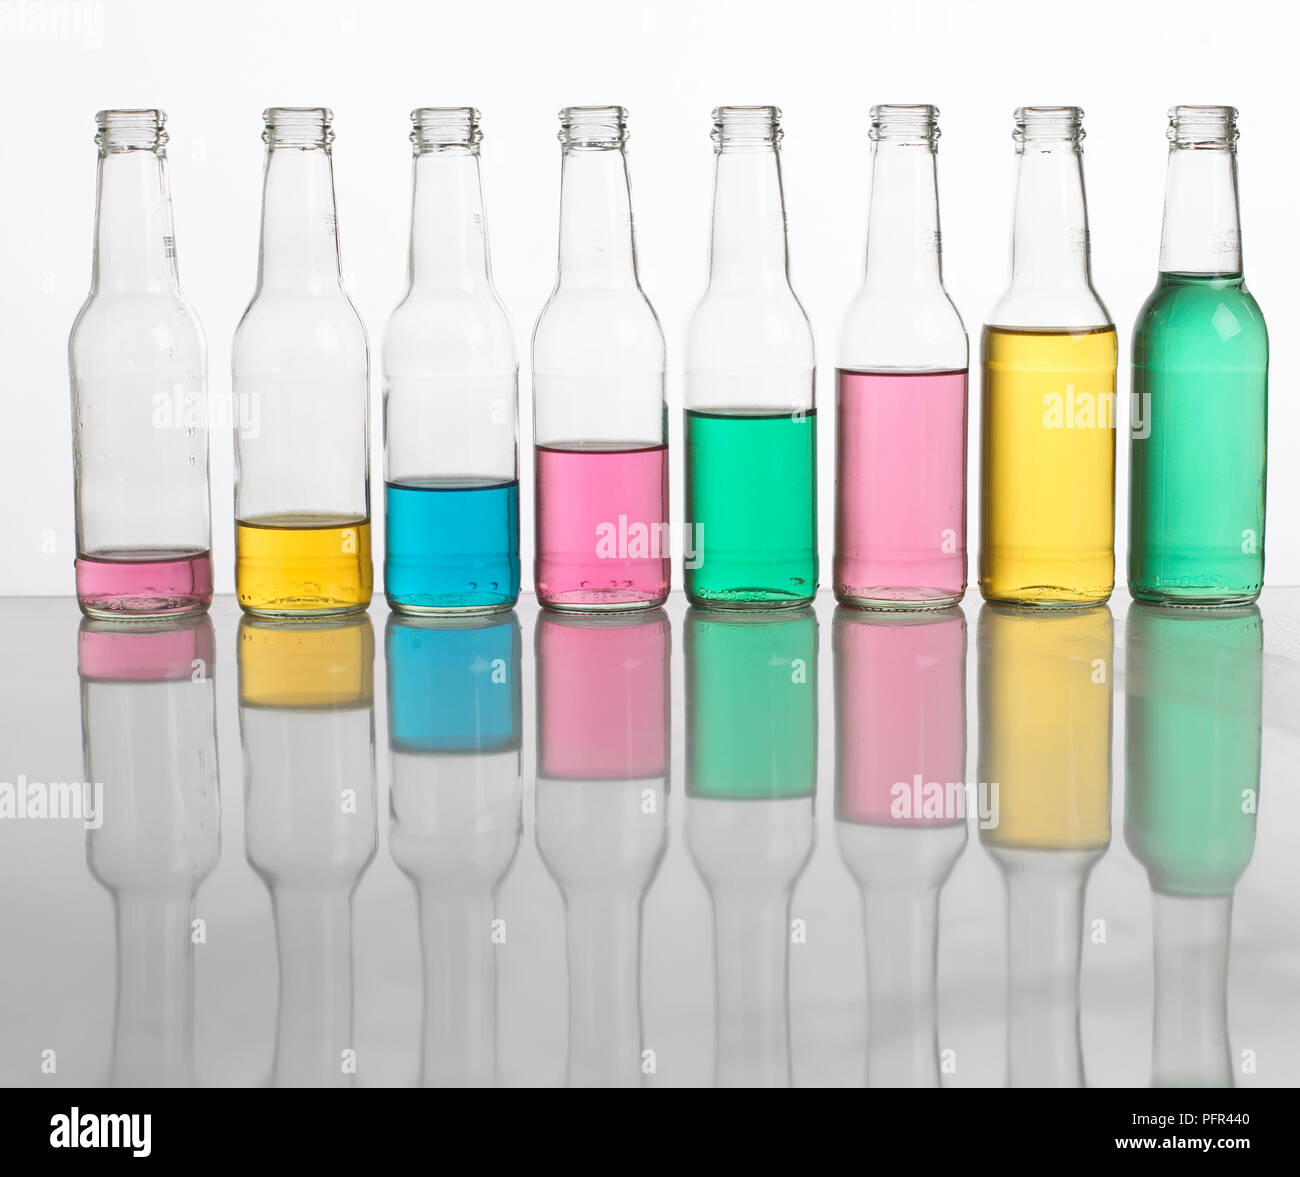 Bottle Pipes Or Bottle Xylophone Bottles Filled With Different Amounts Of Coloured Water Lined Up In A Row Stock Photo Alamy